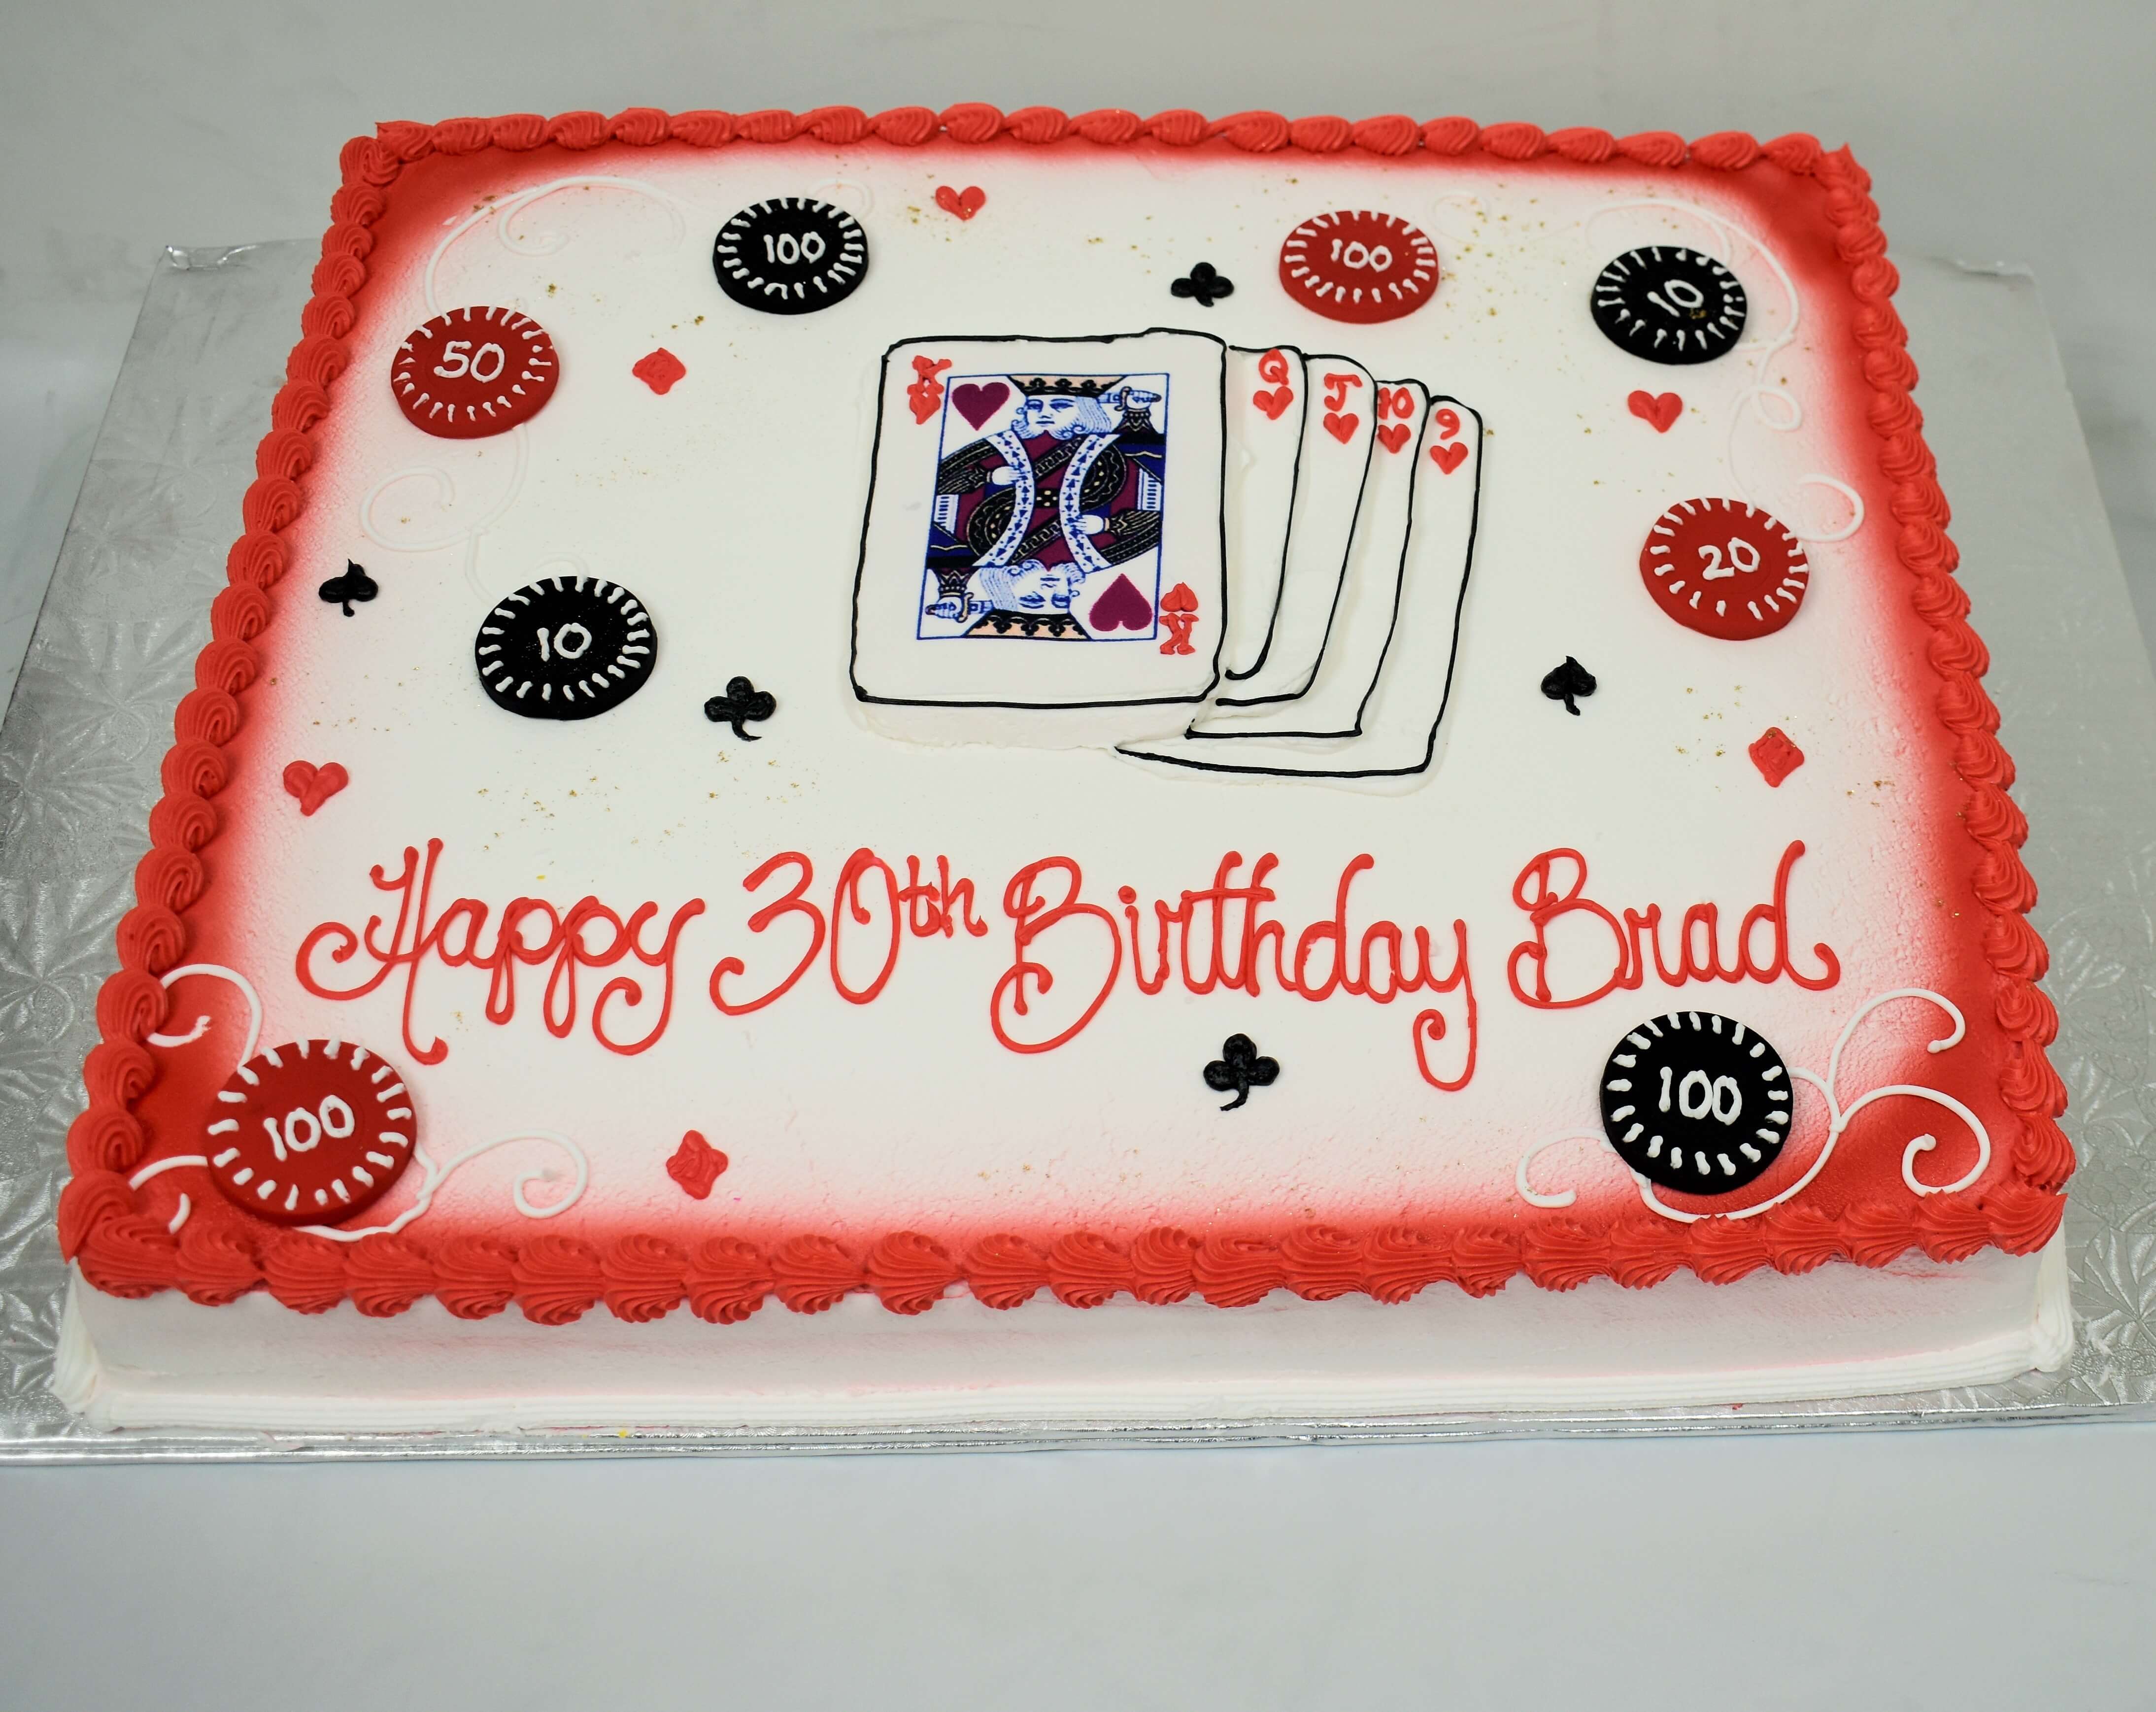 McArthur's Bakery Custom Cake with Red and Black Poker Chips, Cards, 